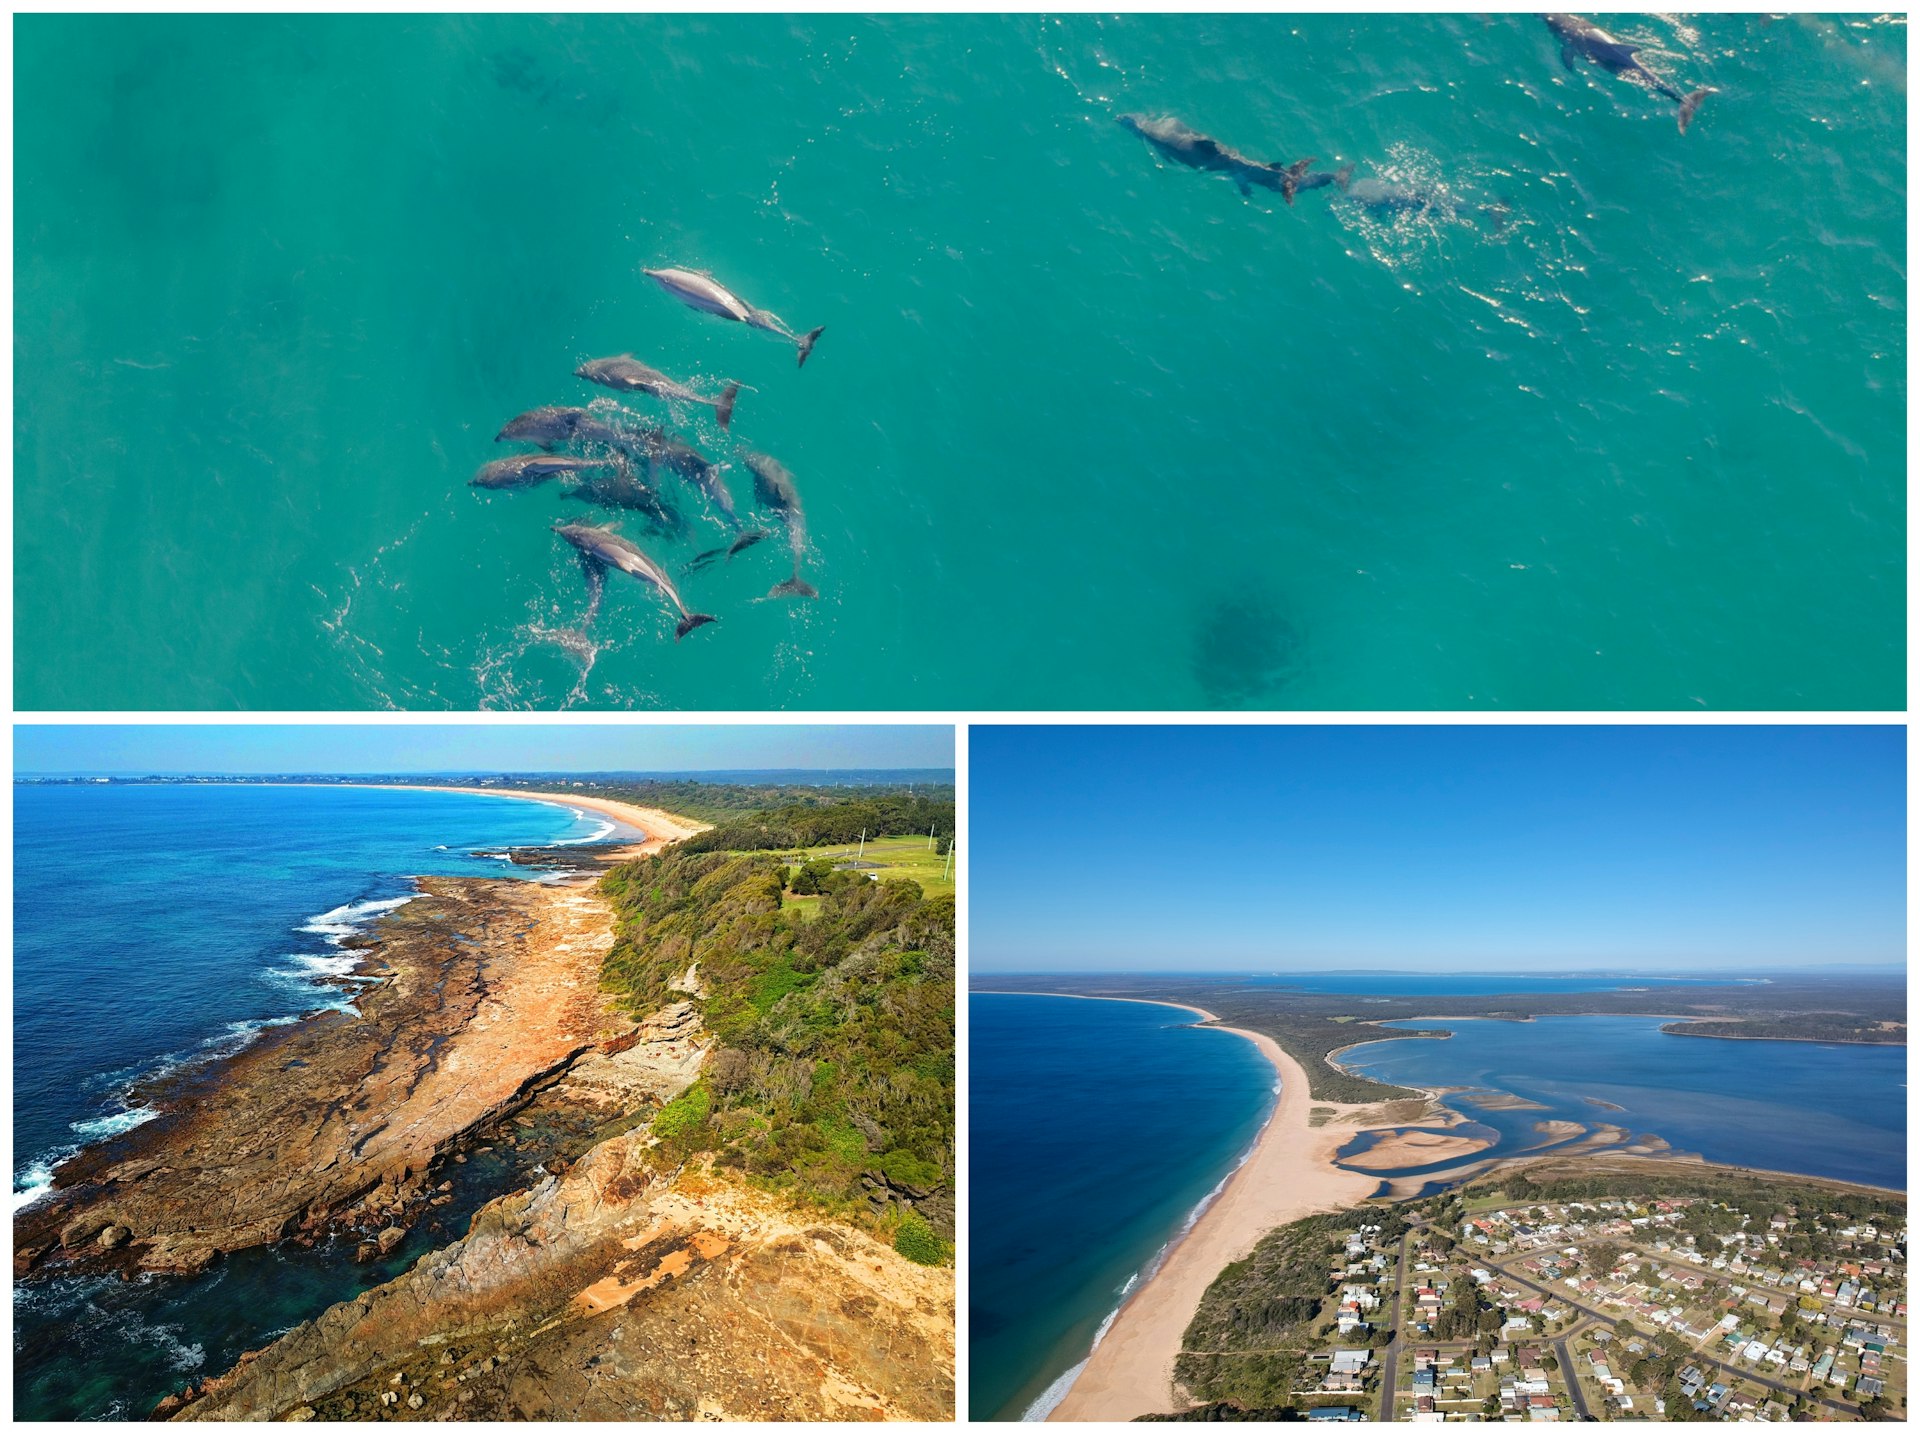 Aerial shots of dolphins in the water and the seaside town of Culburra